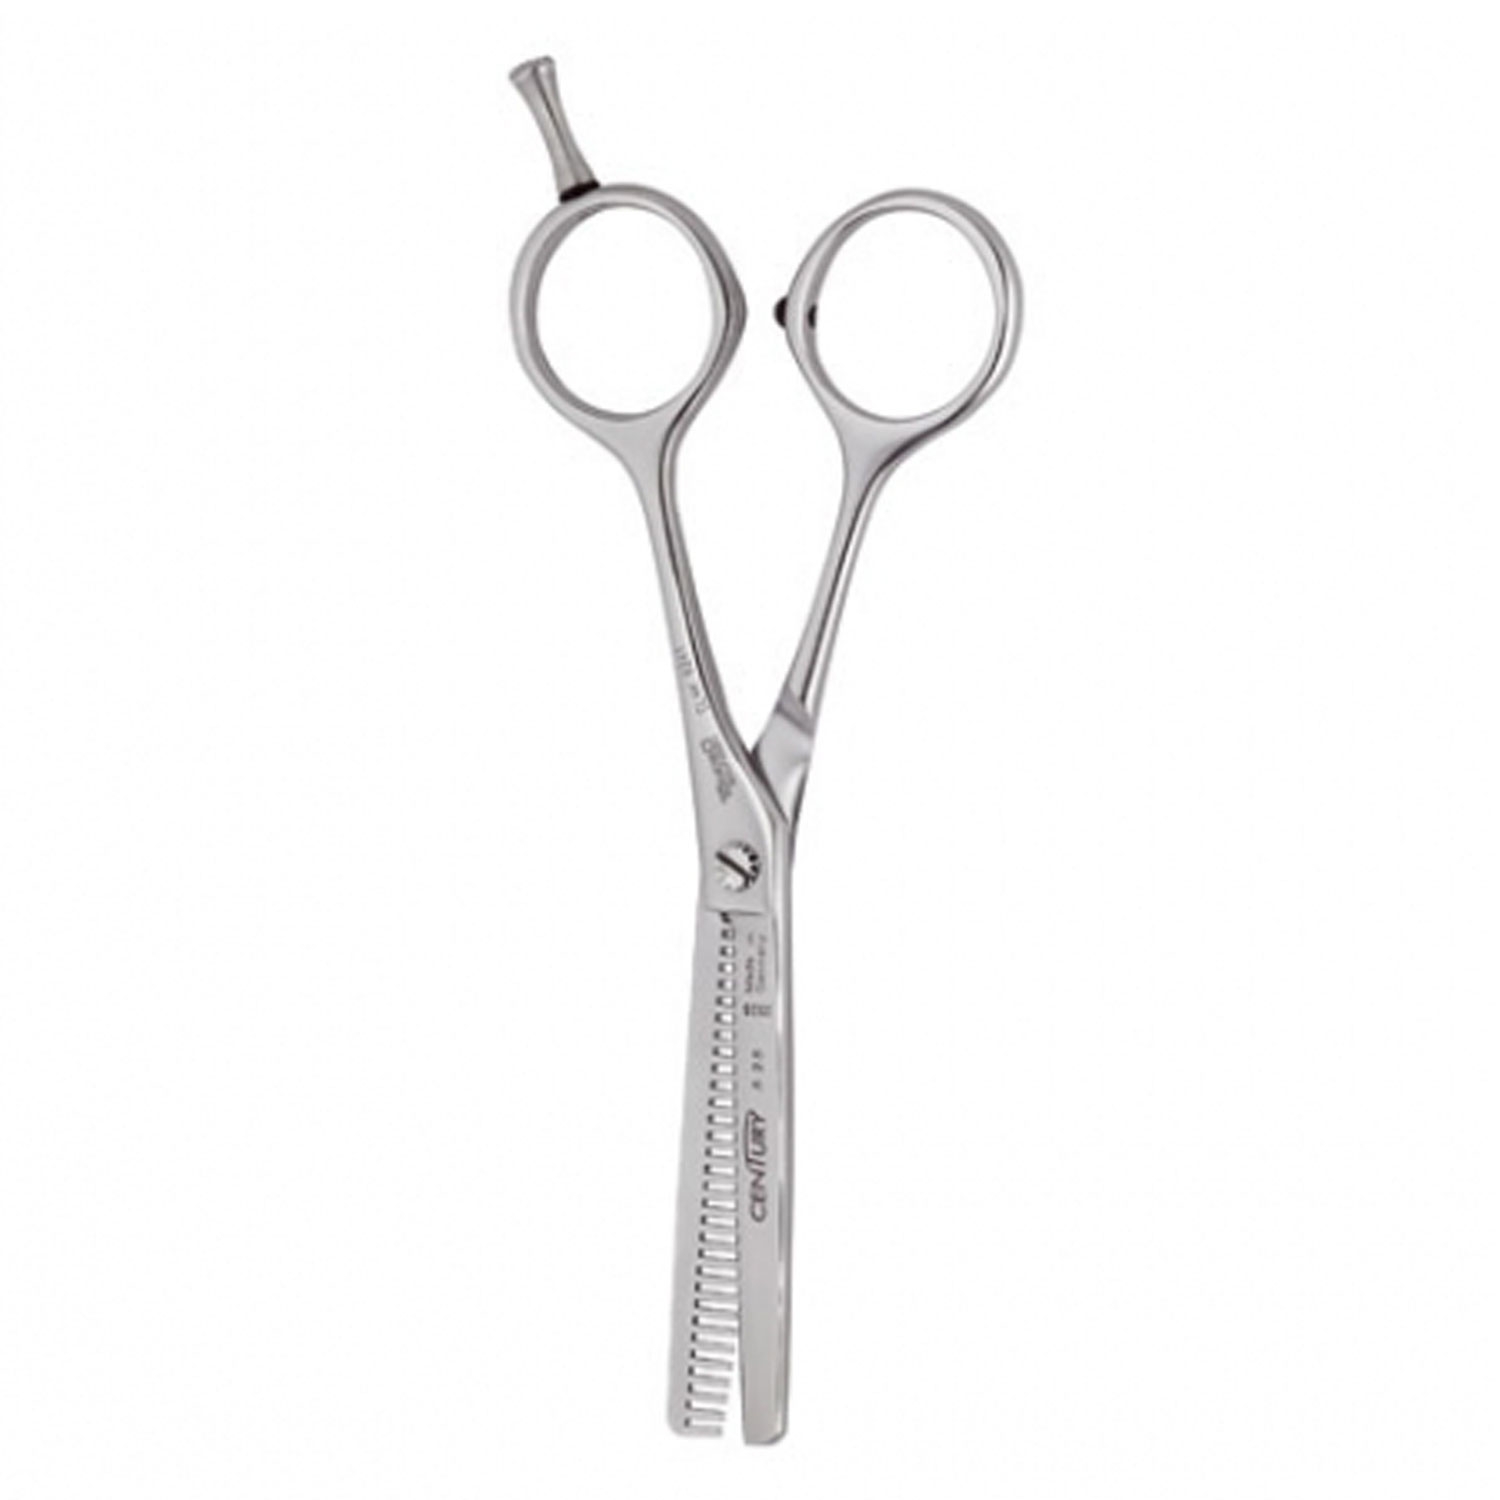 Product image from Tondeo Scissors - Century Classic Thinner 6.25"